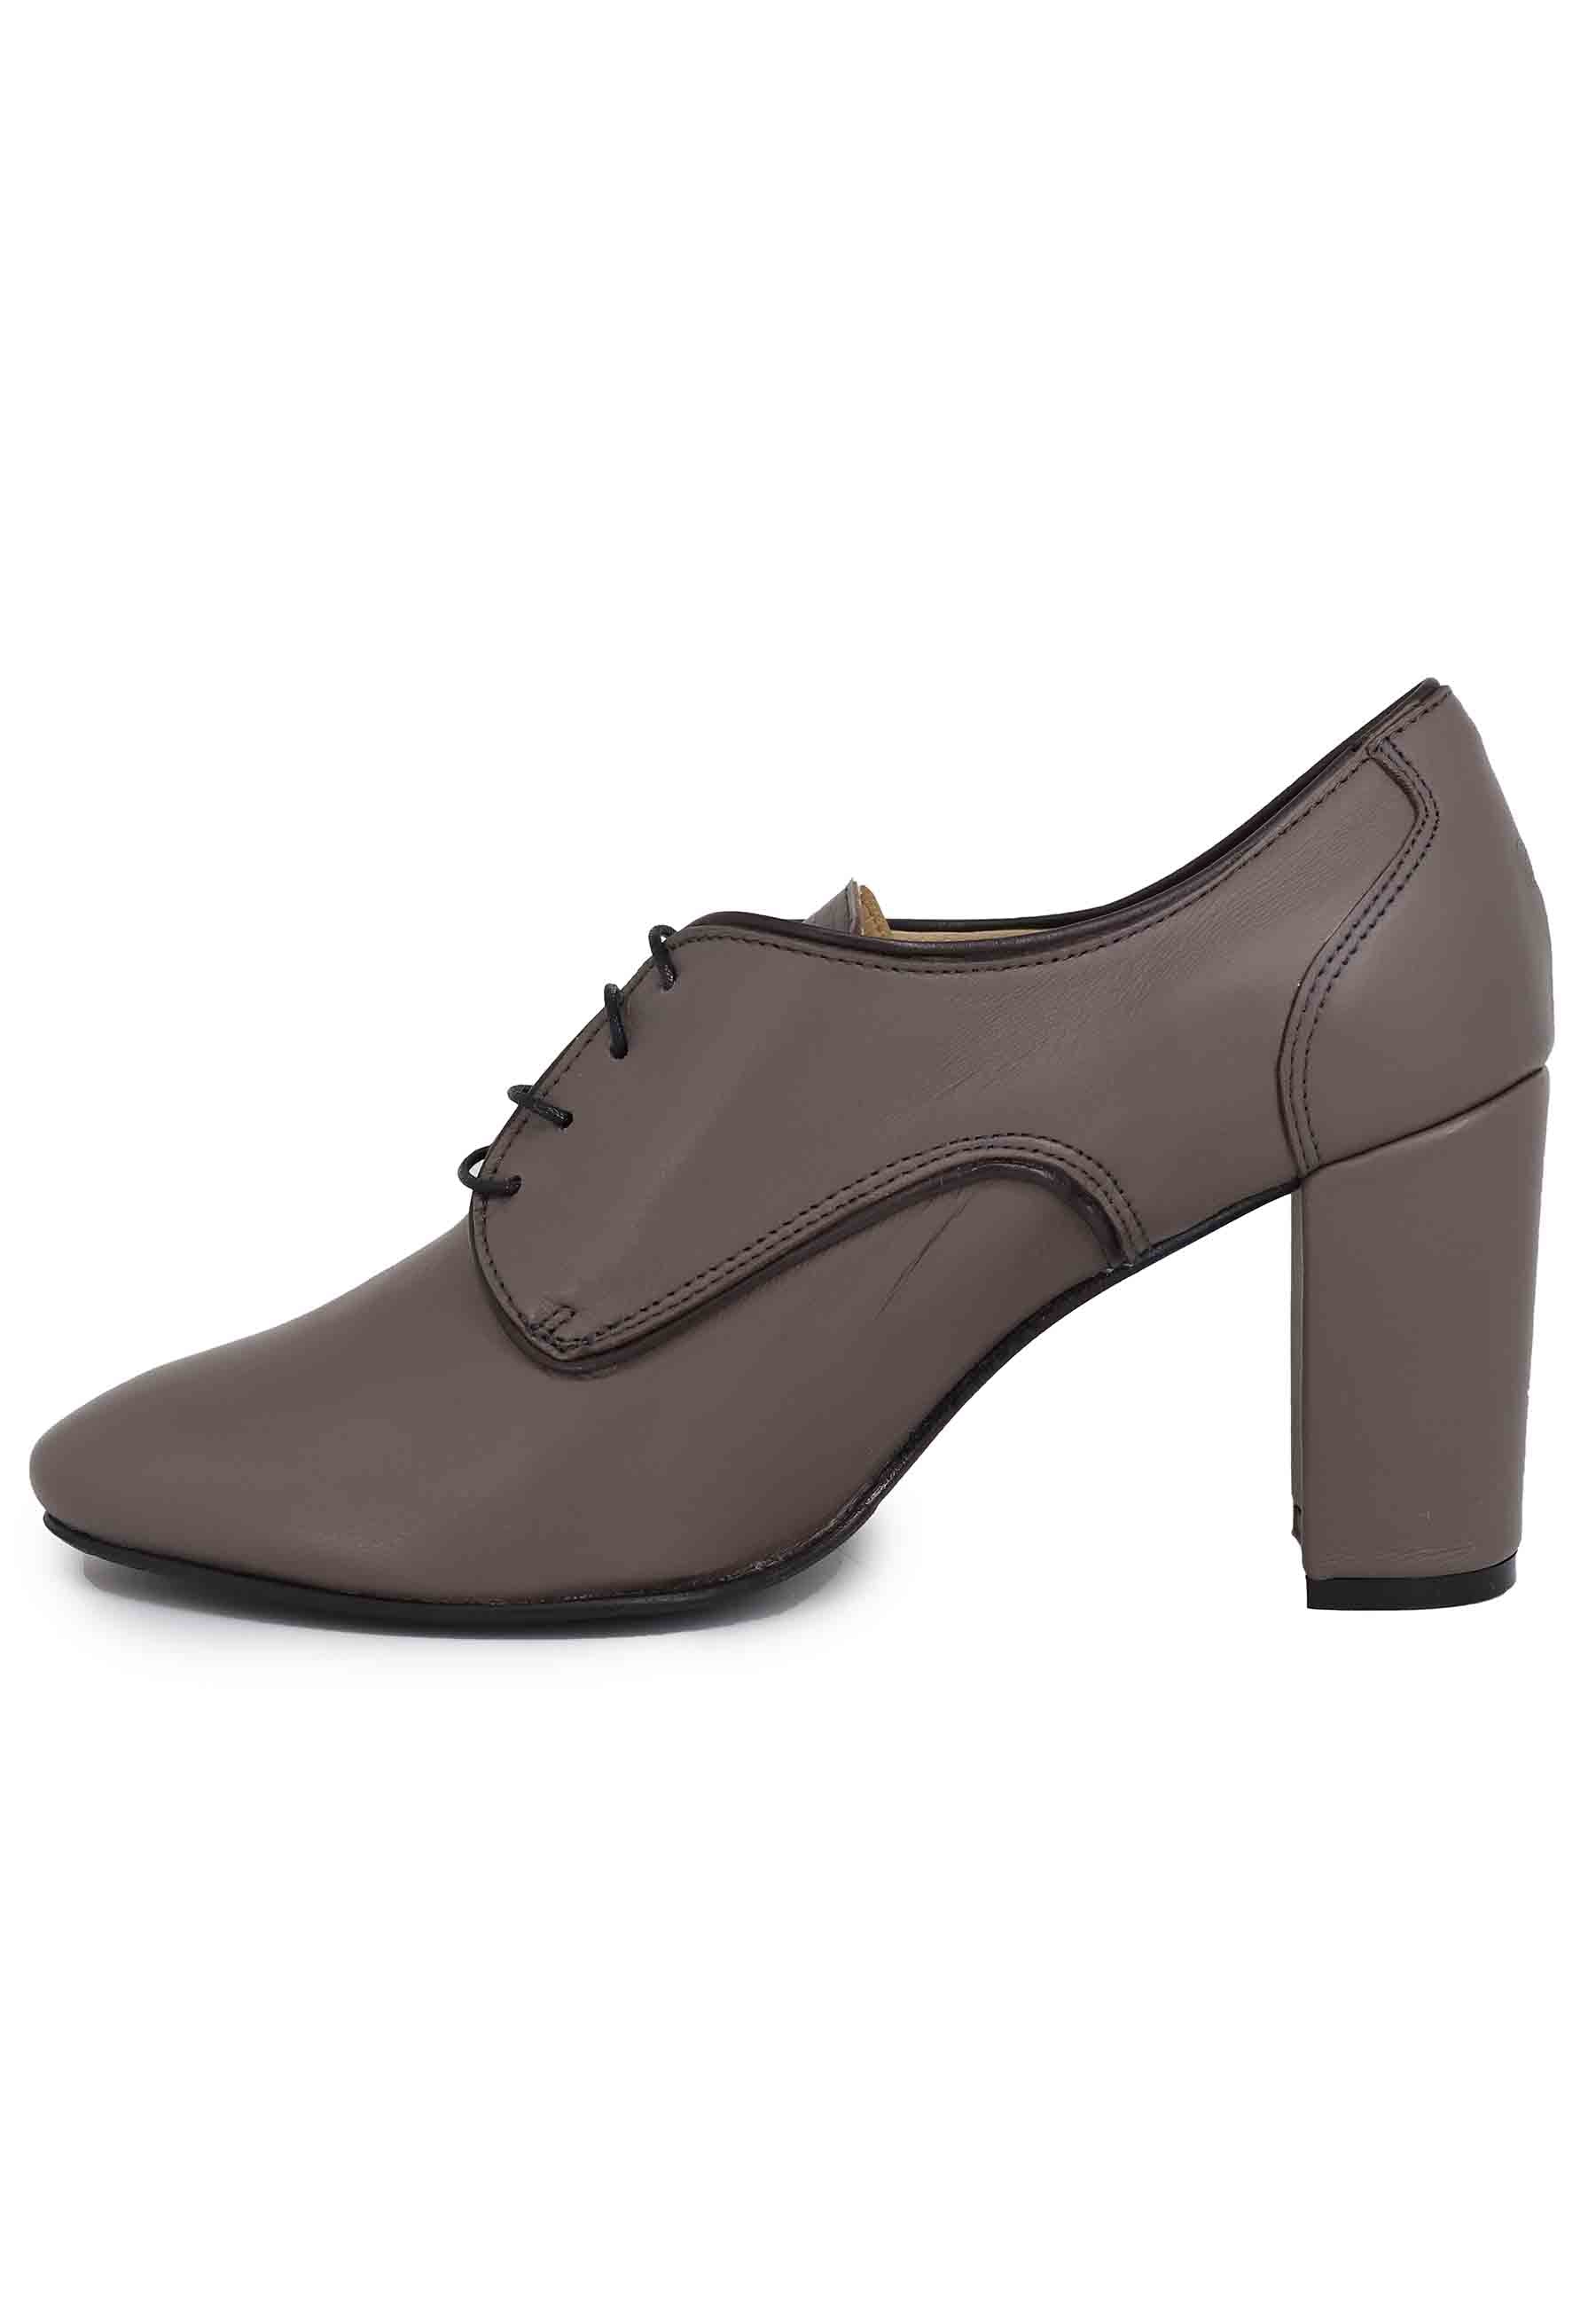 Women's high heel gray leather lace-ups